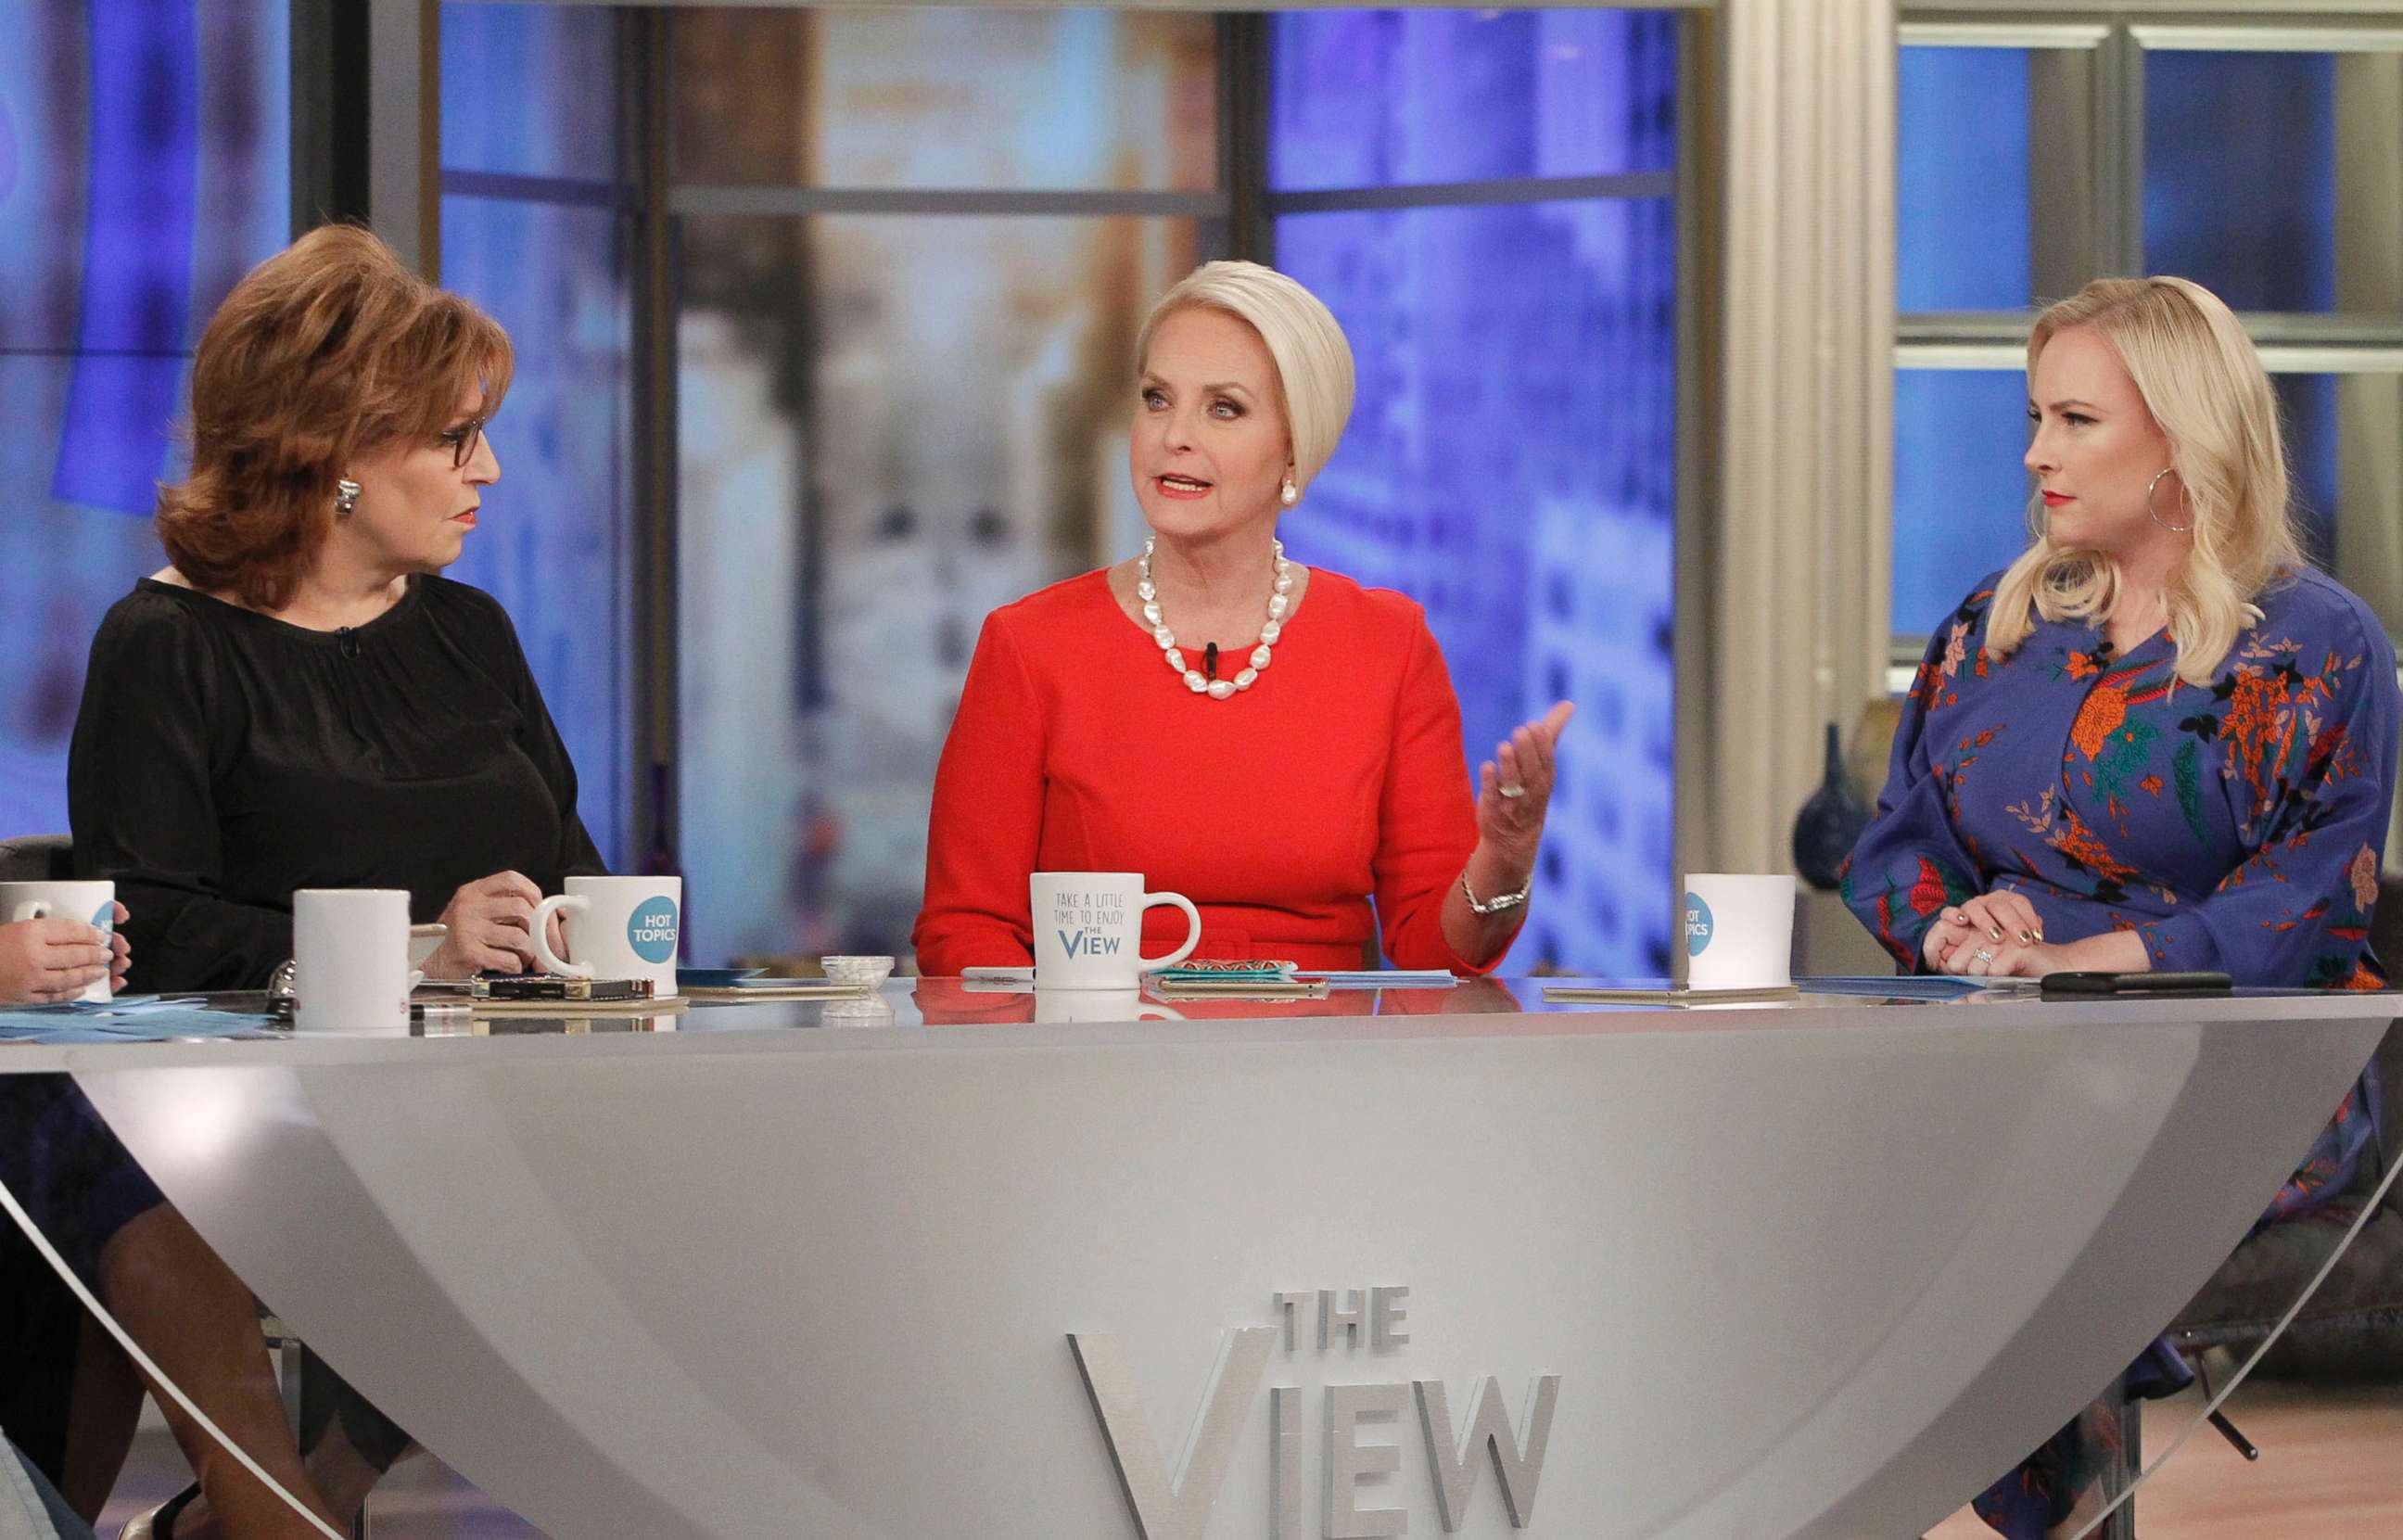 PHOTO: Cindy McCain, during her appearance on ABC's "The View",February 28, 2018.